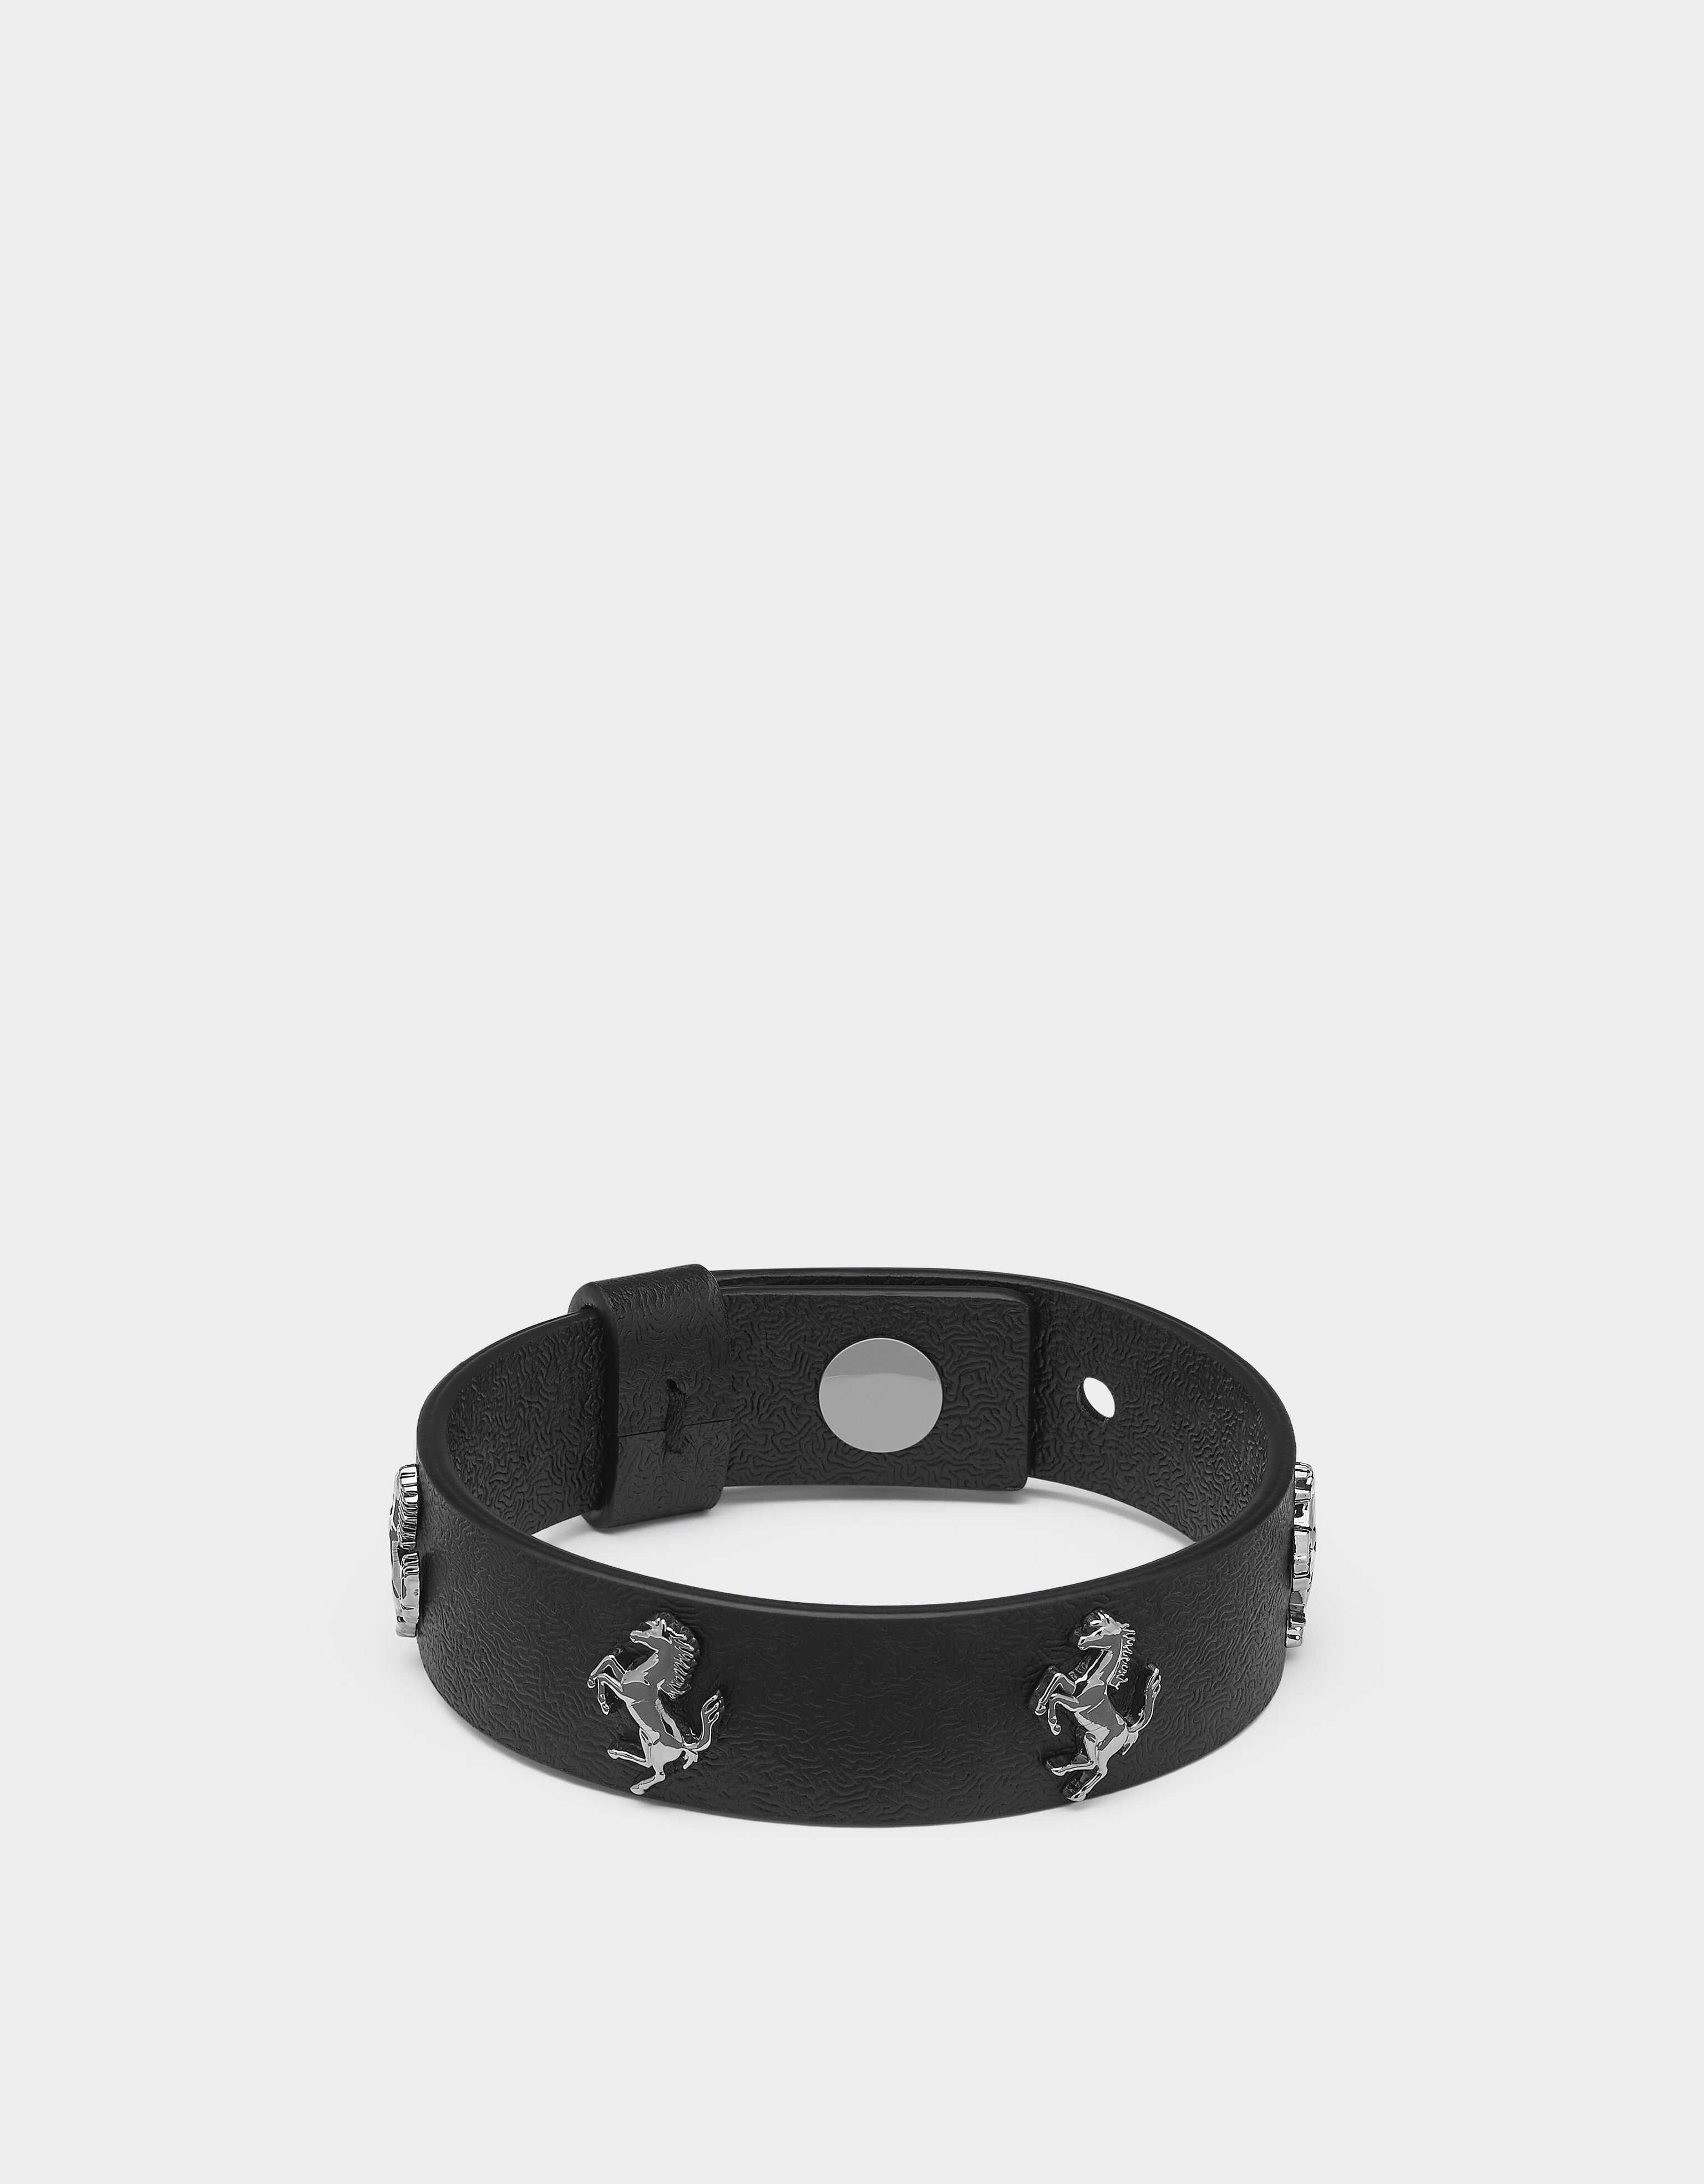 Ferrari Leather bracelet with metal studs featuring the Prancing Horse Charcoal 20010f